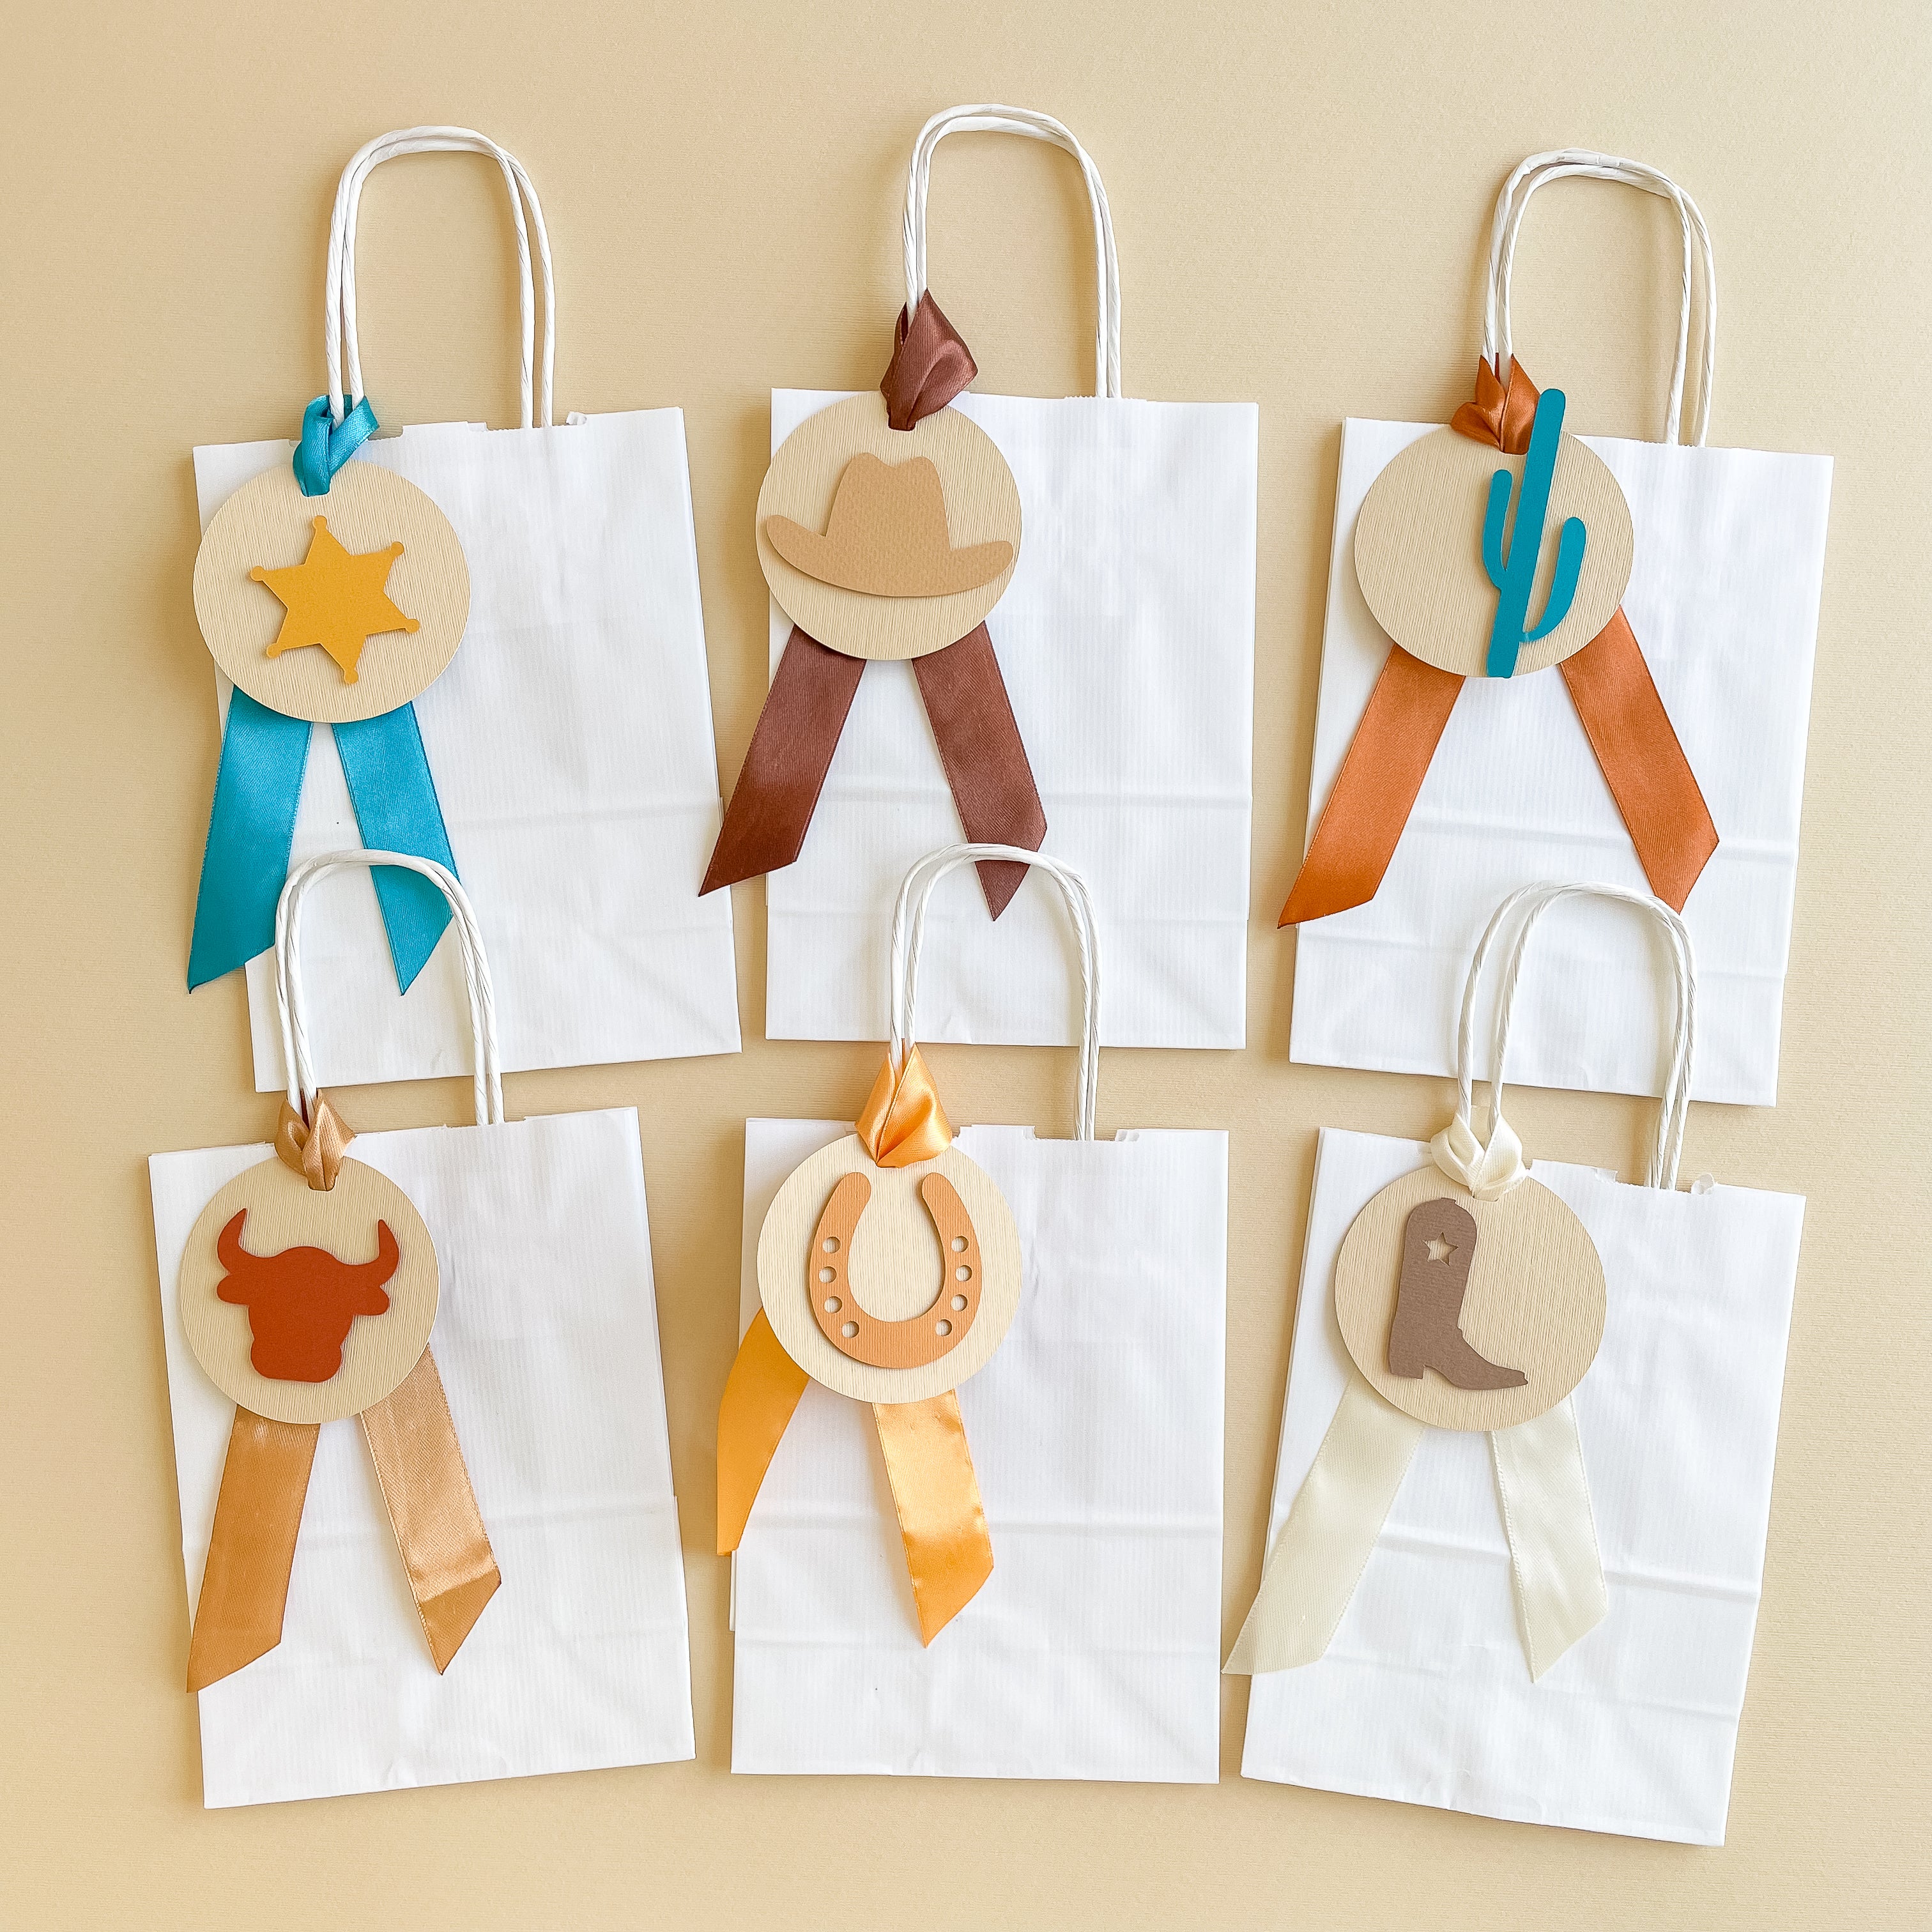 Cowboy Rodeo Gift Favor Paper Bags Rodeo Birthday Party Decorations Rodeo Baby Shower My First Rodeo Birthday Party Cowboy 1st Birthday Decorations Wild West Party Decor